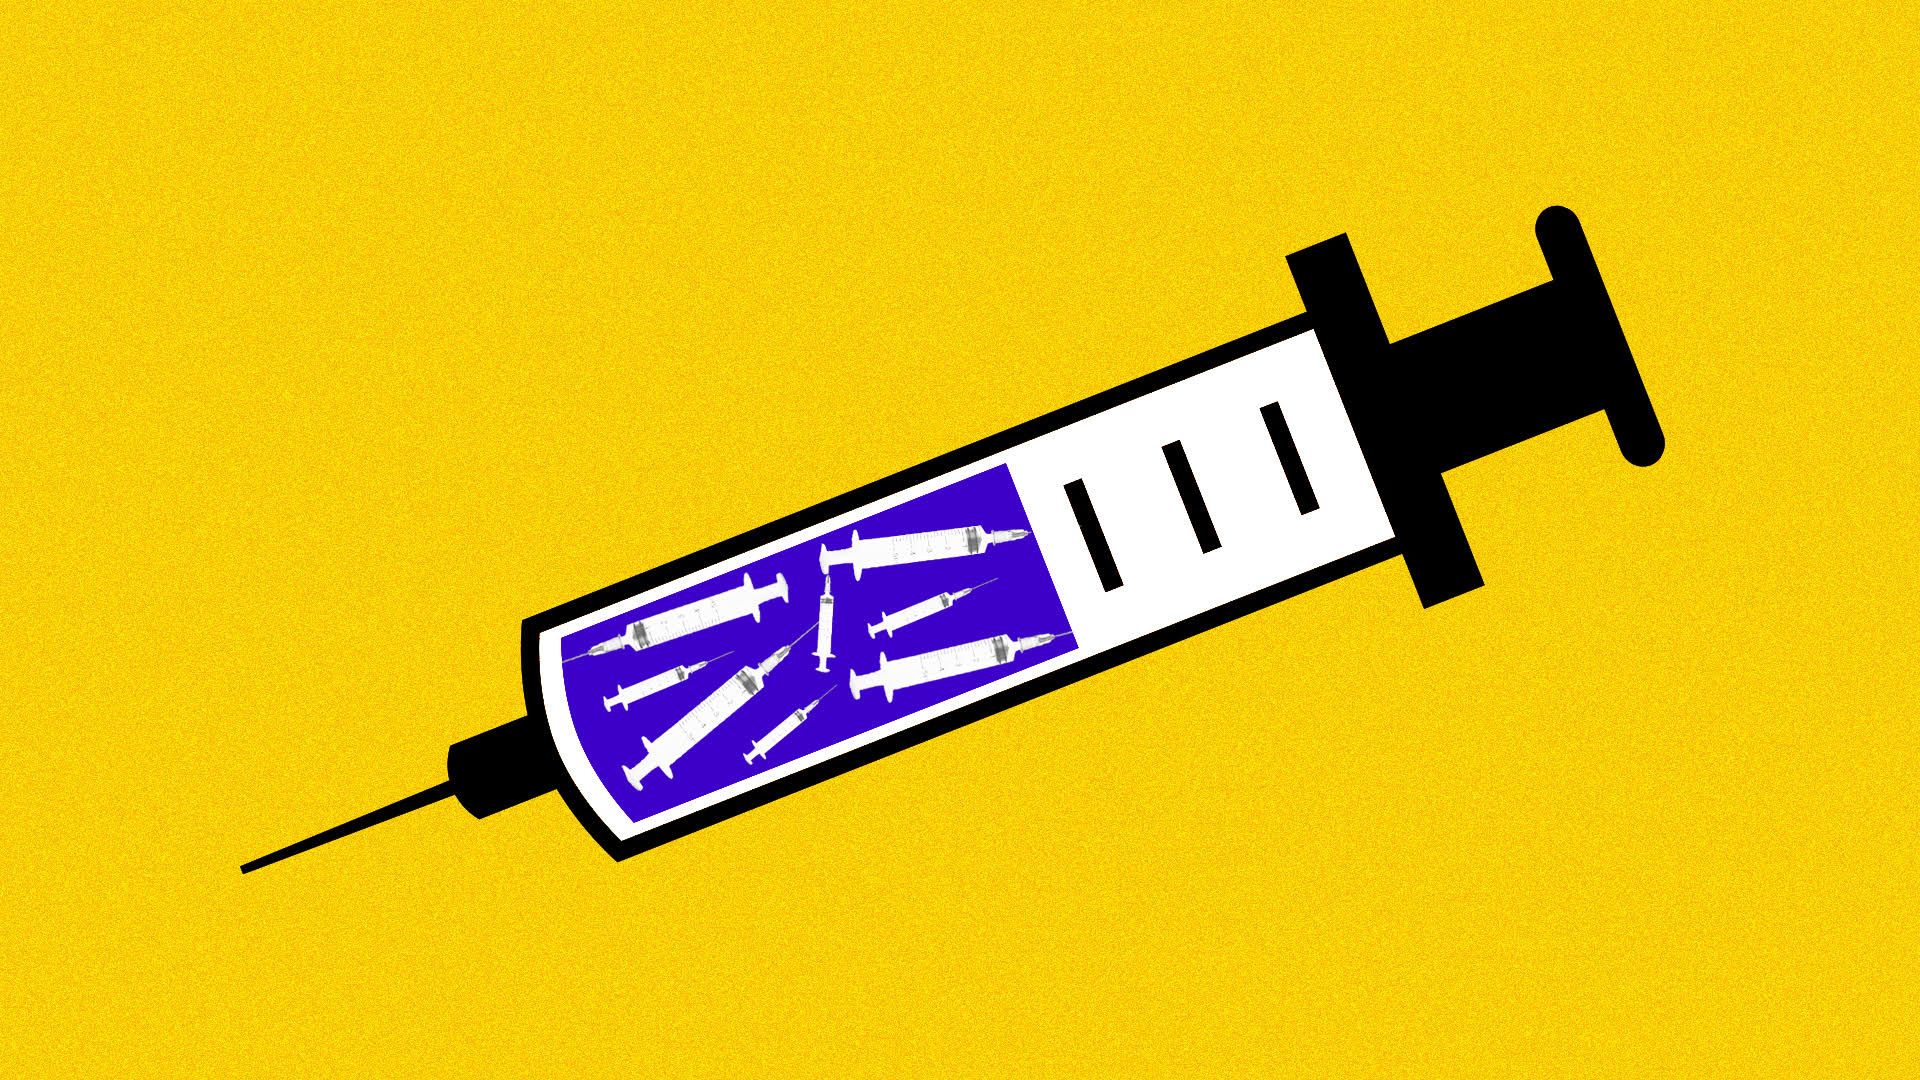 Illustration of a giant needle holding multiple needles inside, showing vaccination against multiple types of flu